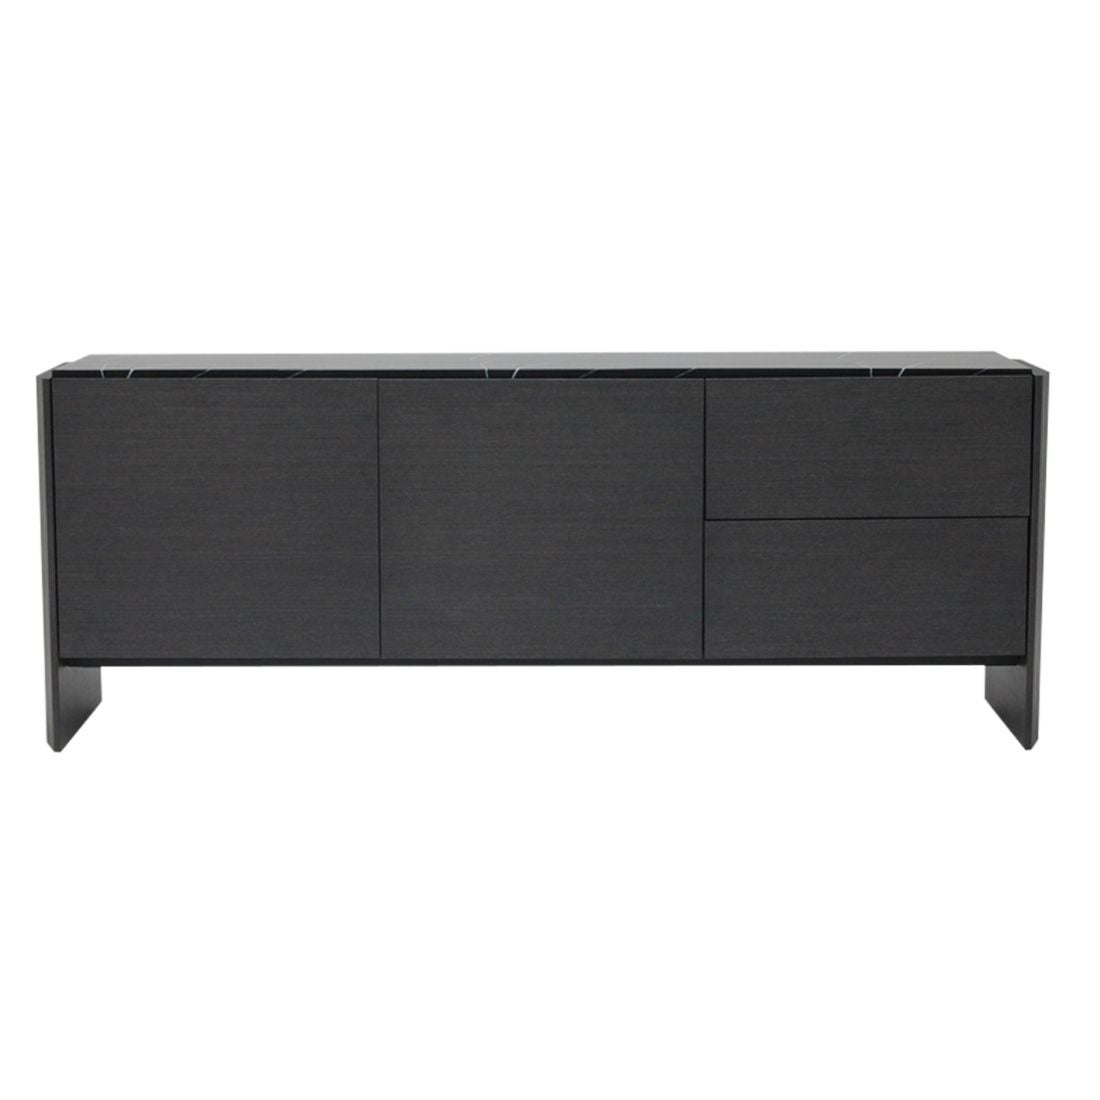 19203173-wenson-furniture-living-room-console-01